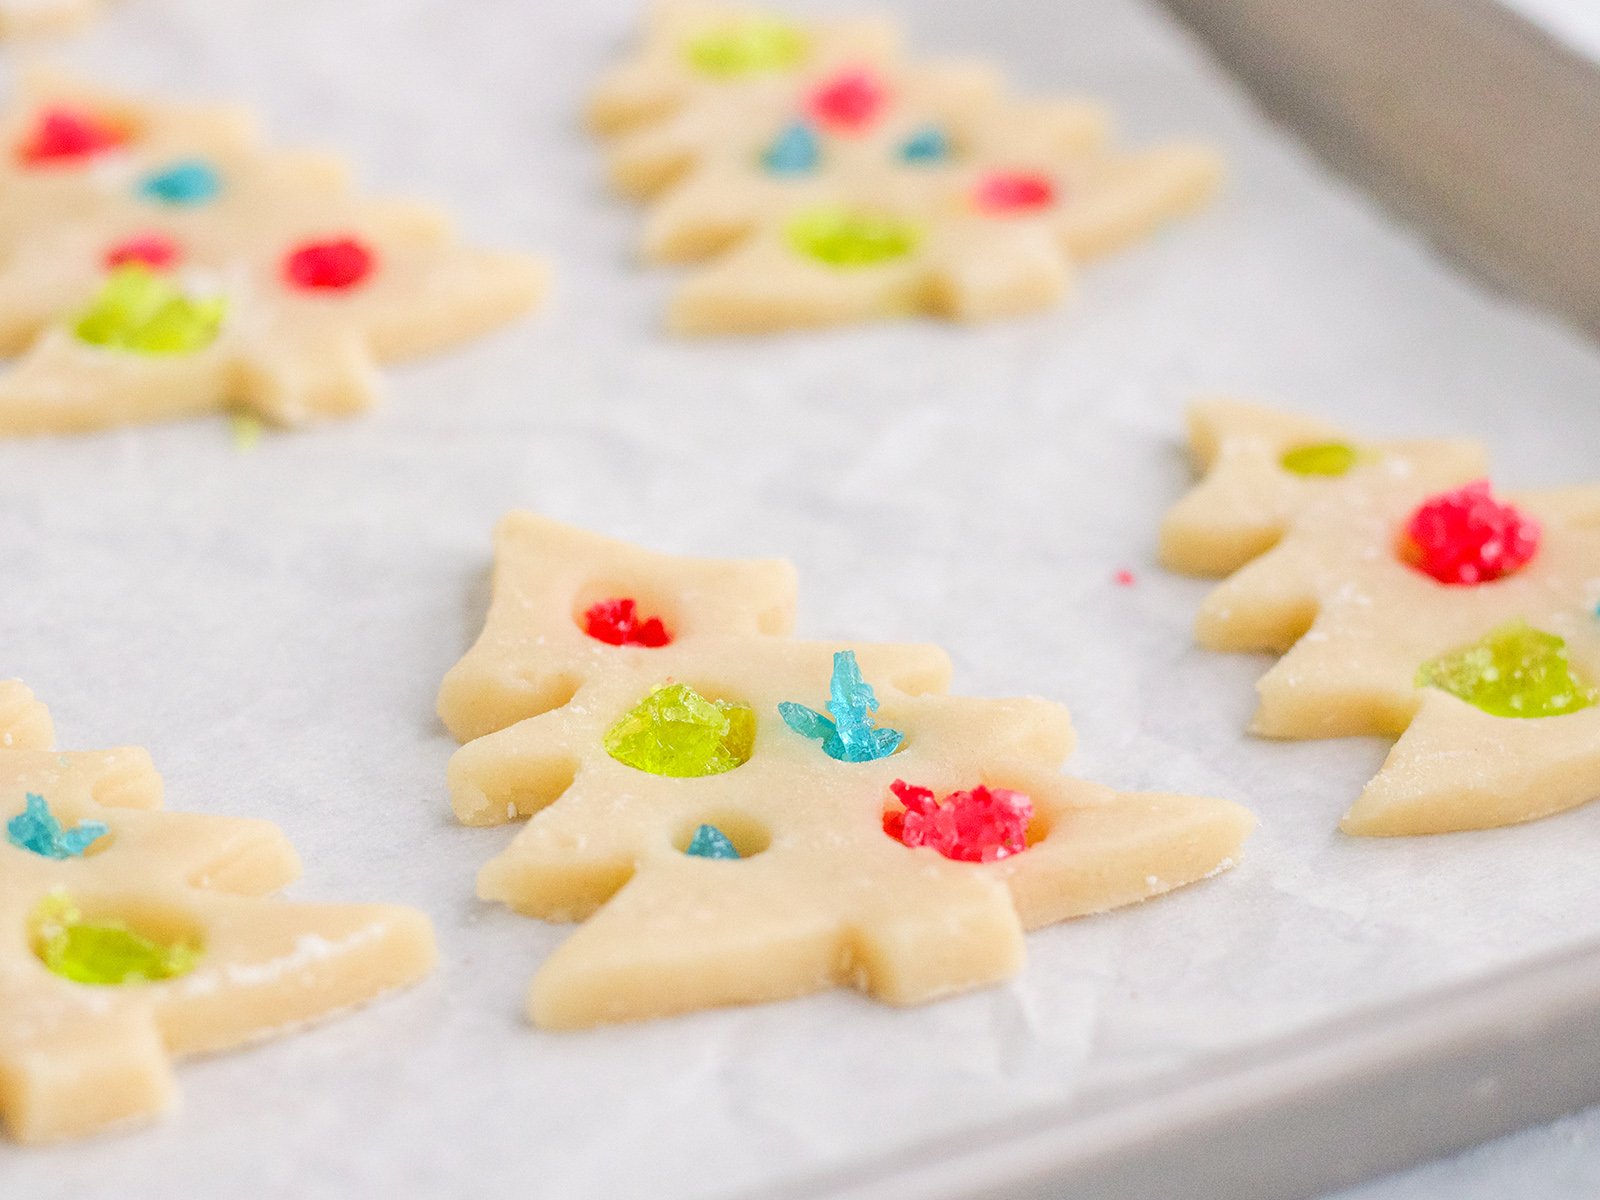 How to Make Stain Glass Cookies